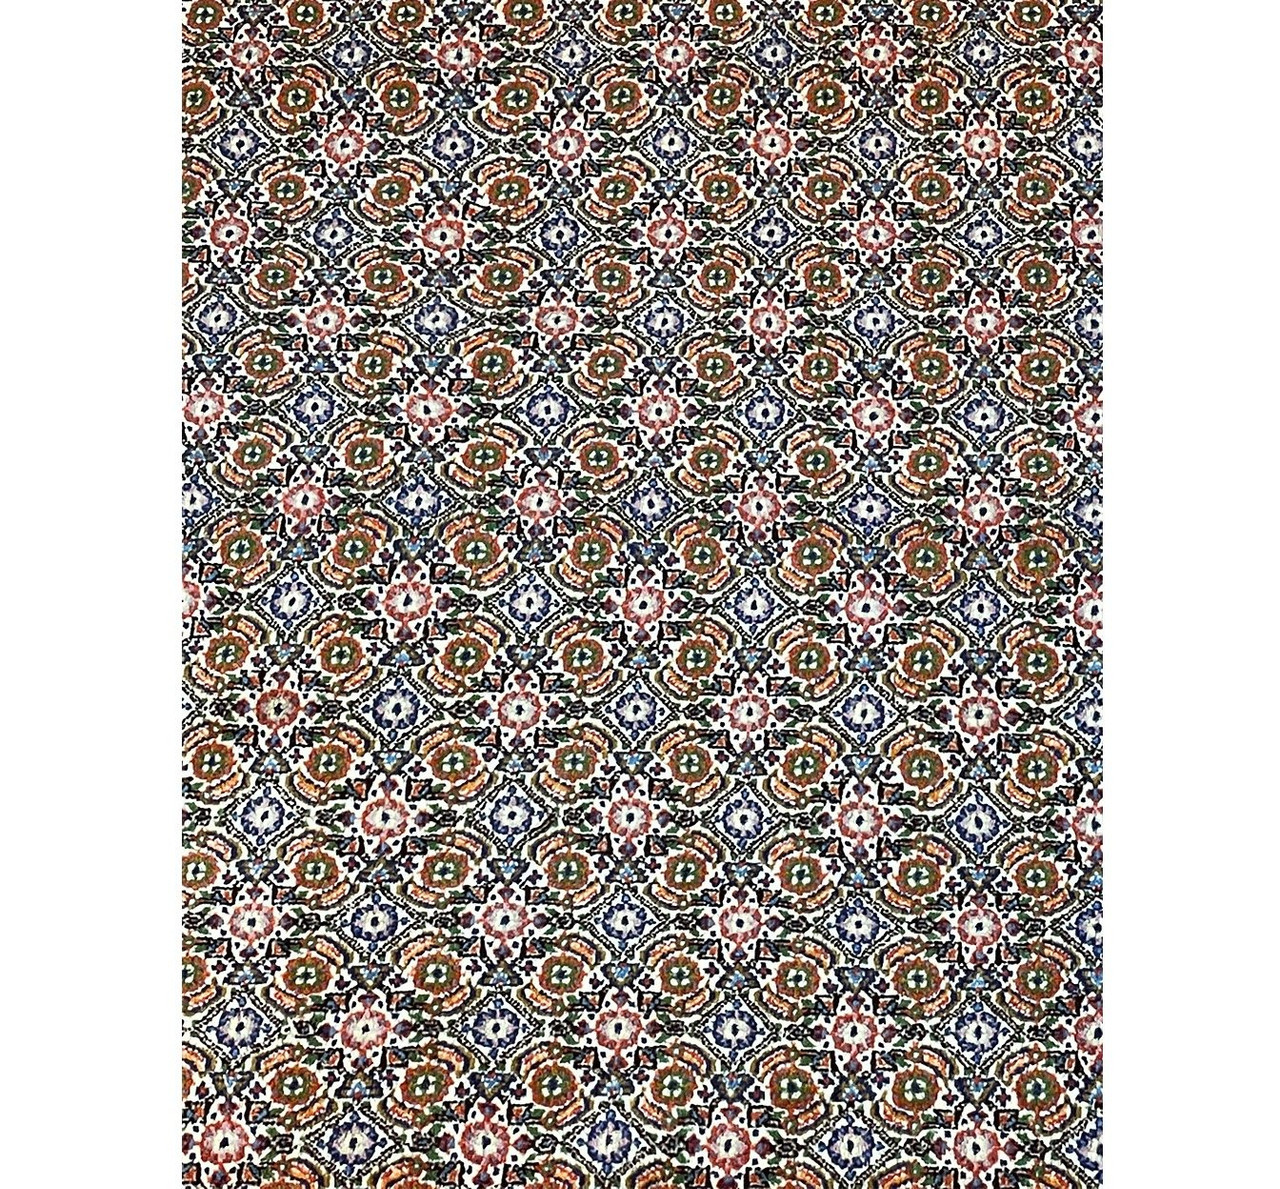 6'4" x 8'2" Persian Moud All-Over Design Rug